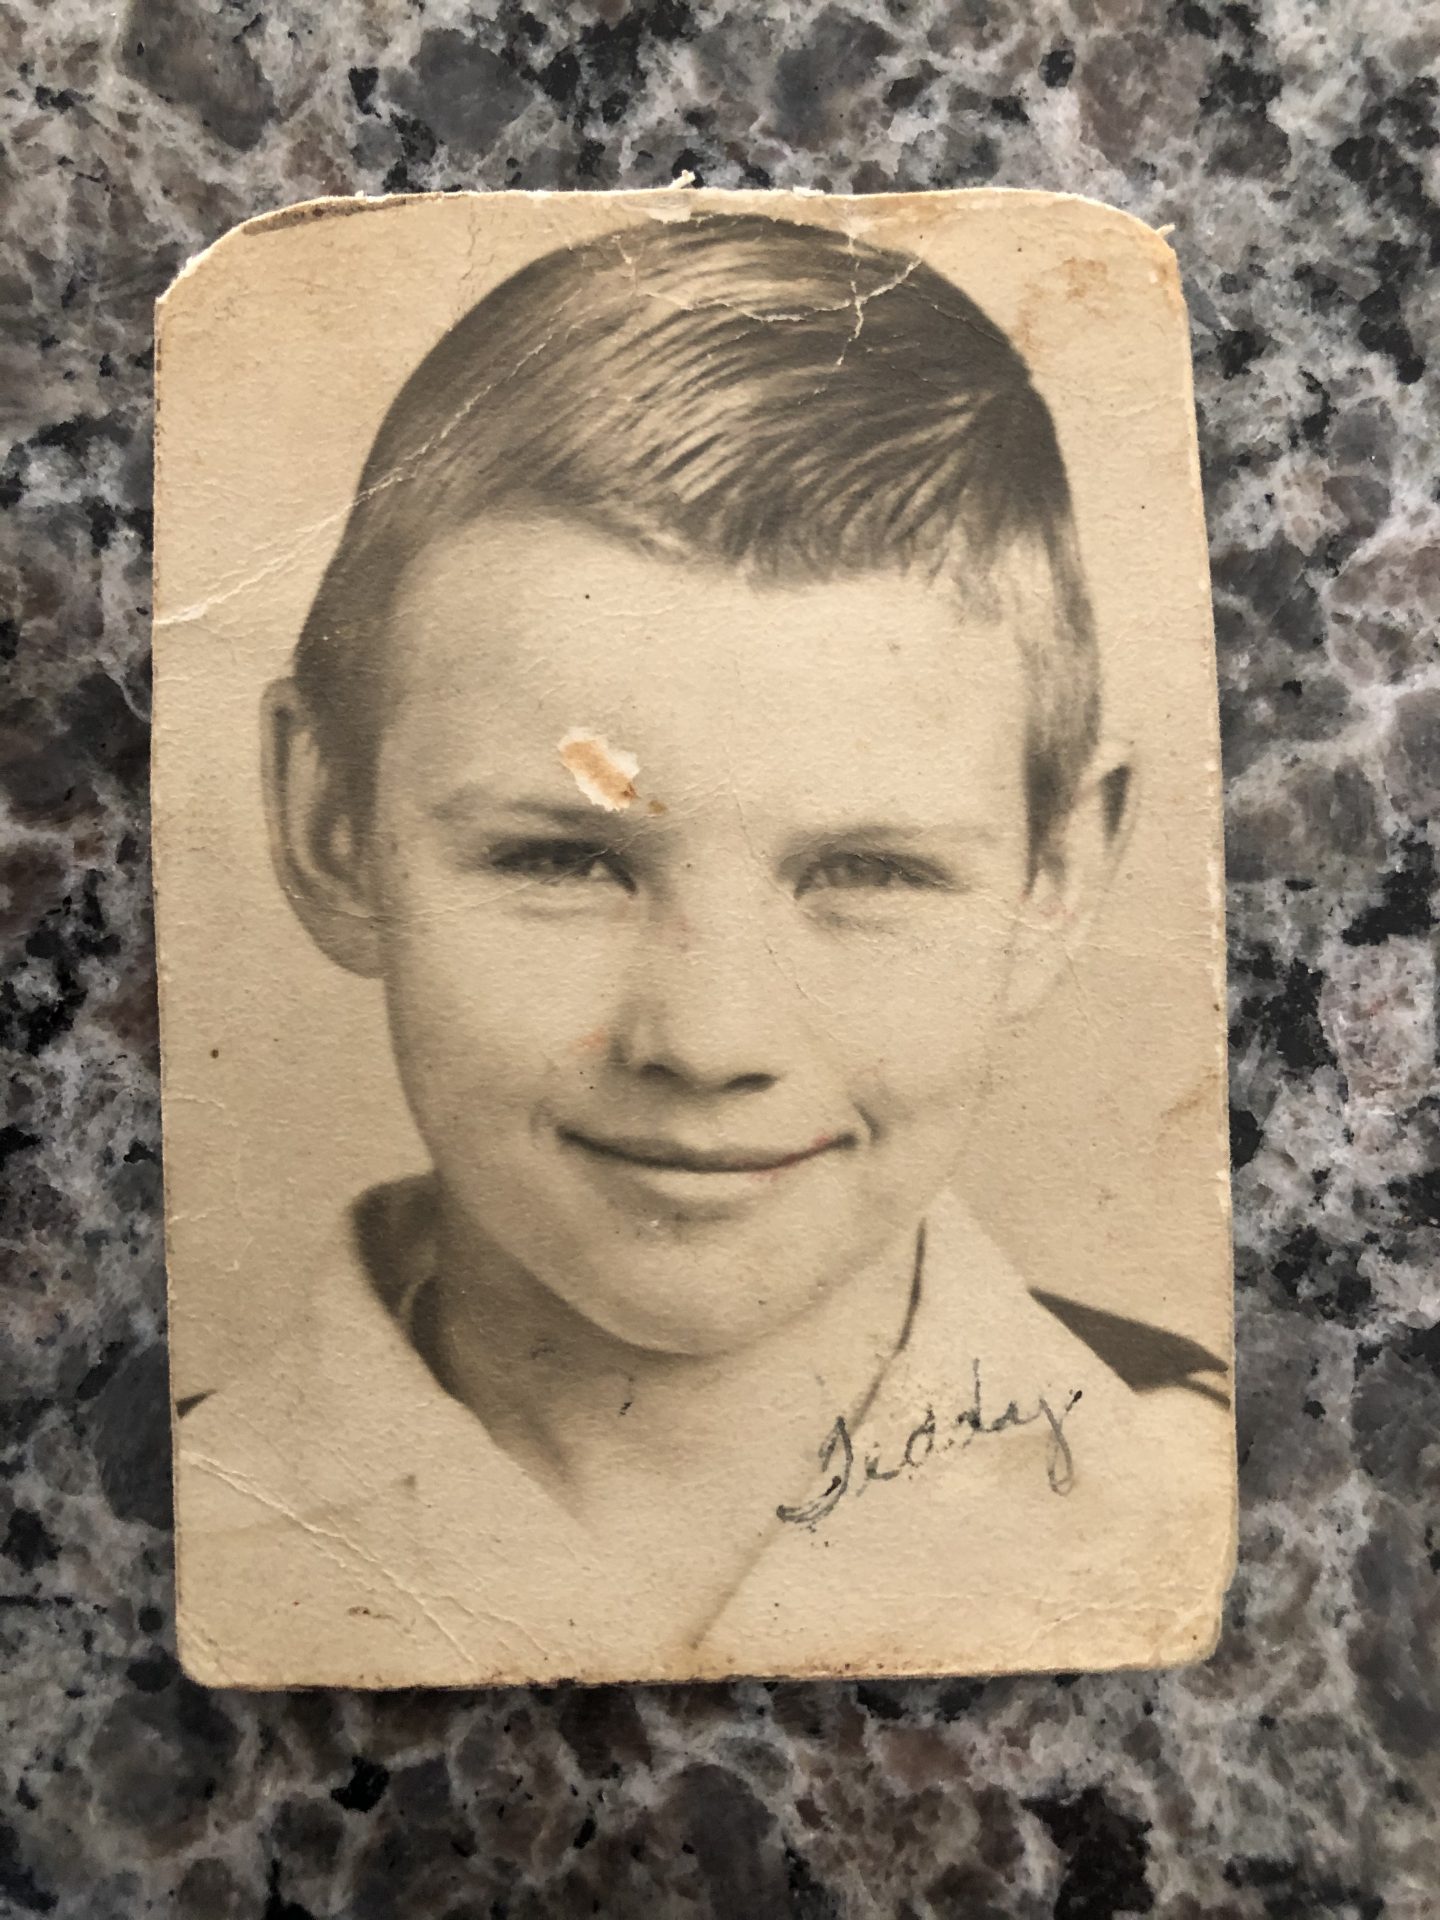 Dad at the age of 10 or 11 (1947)